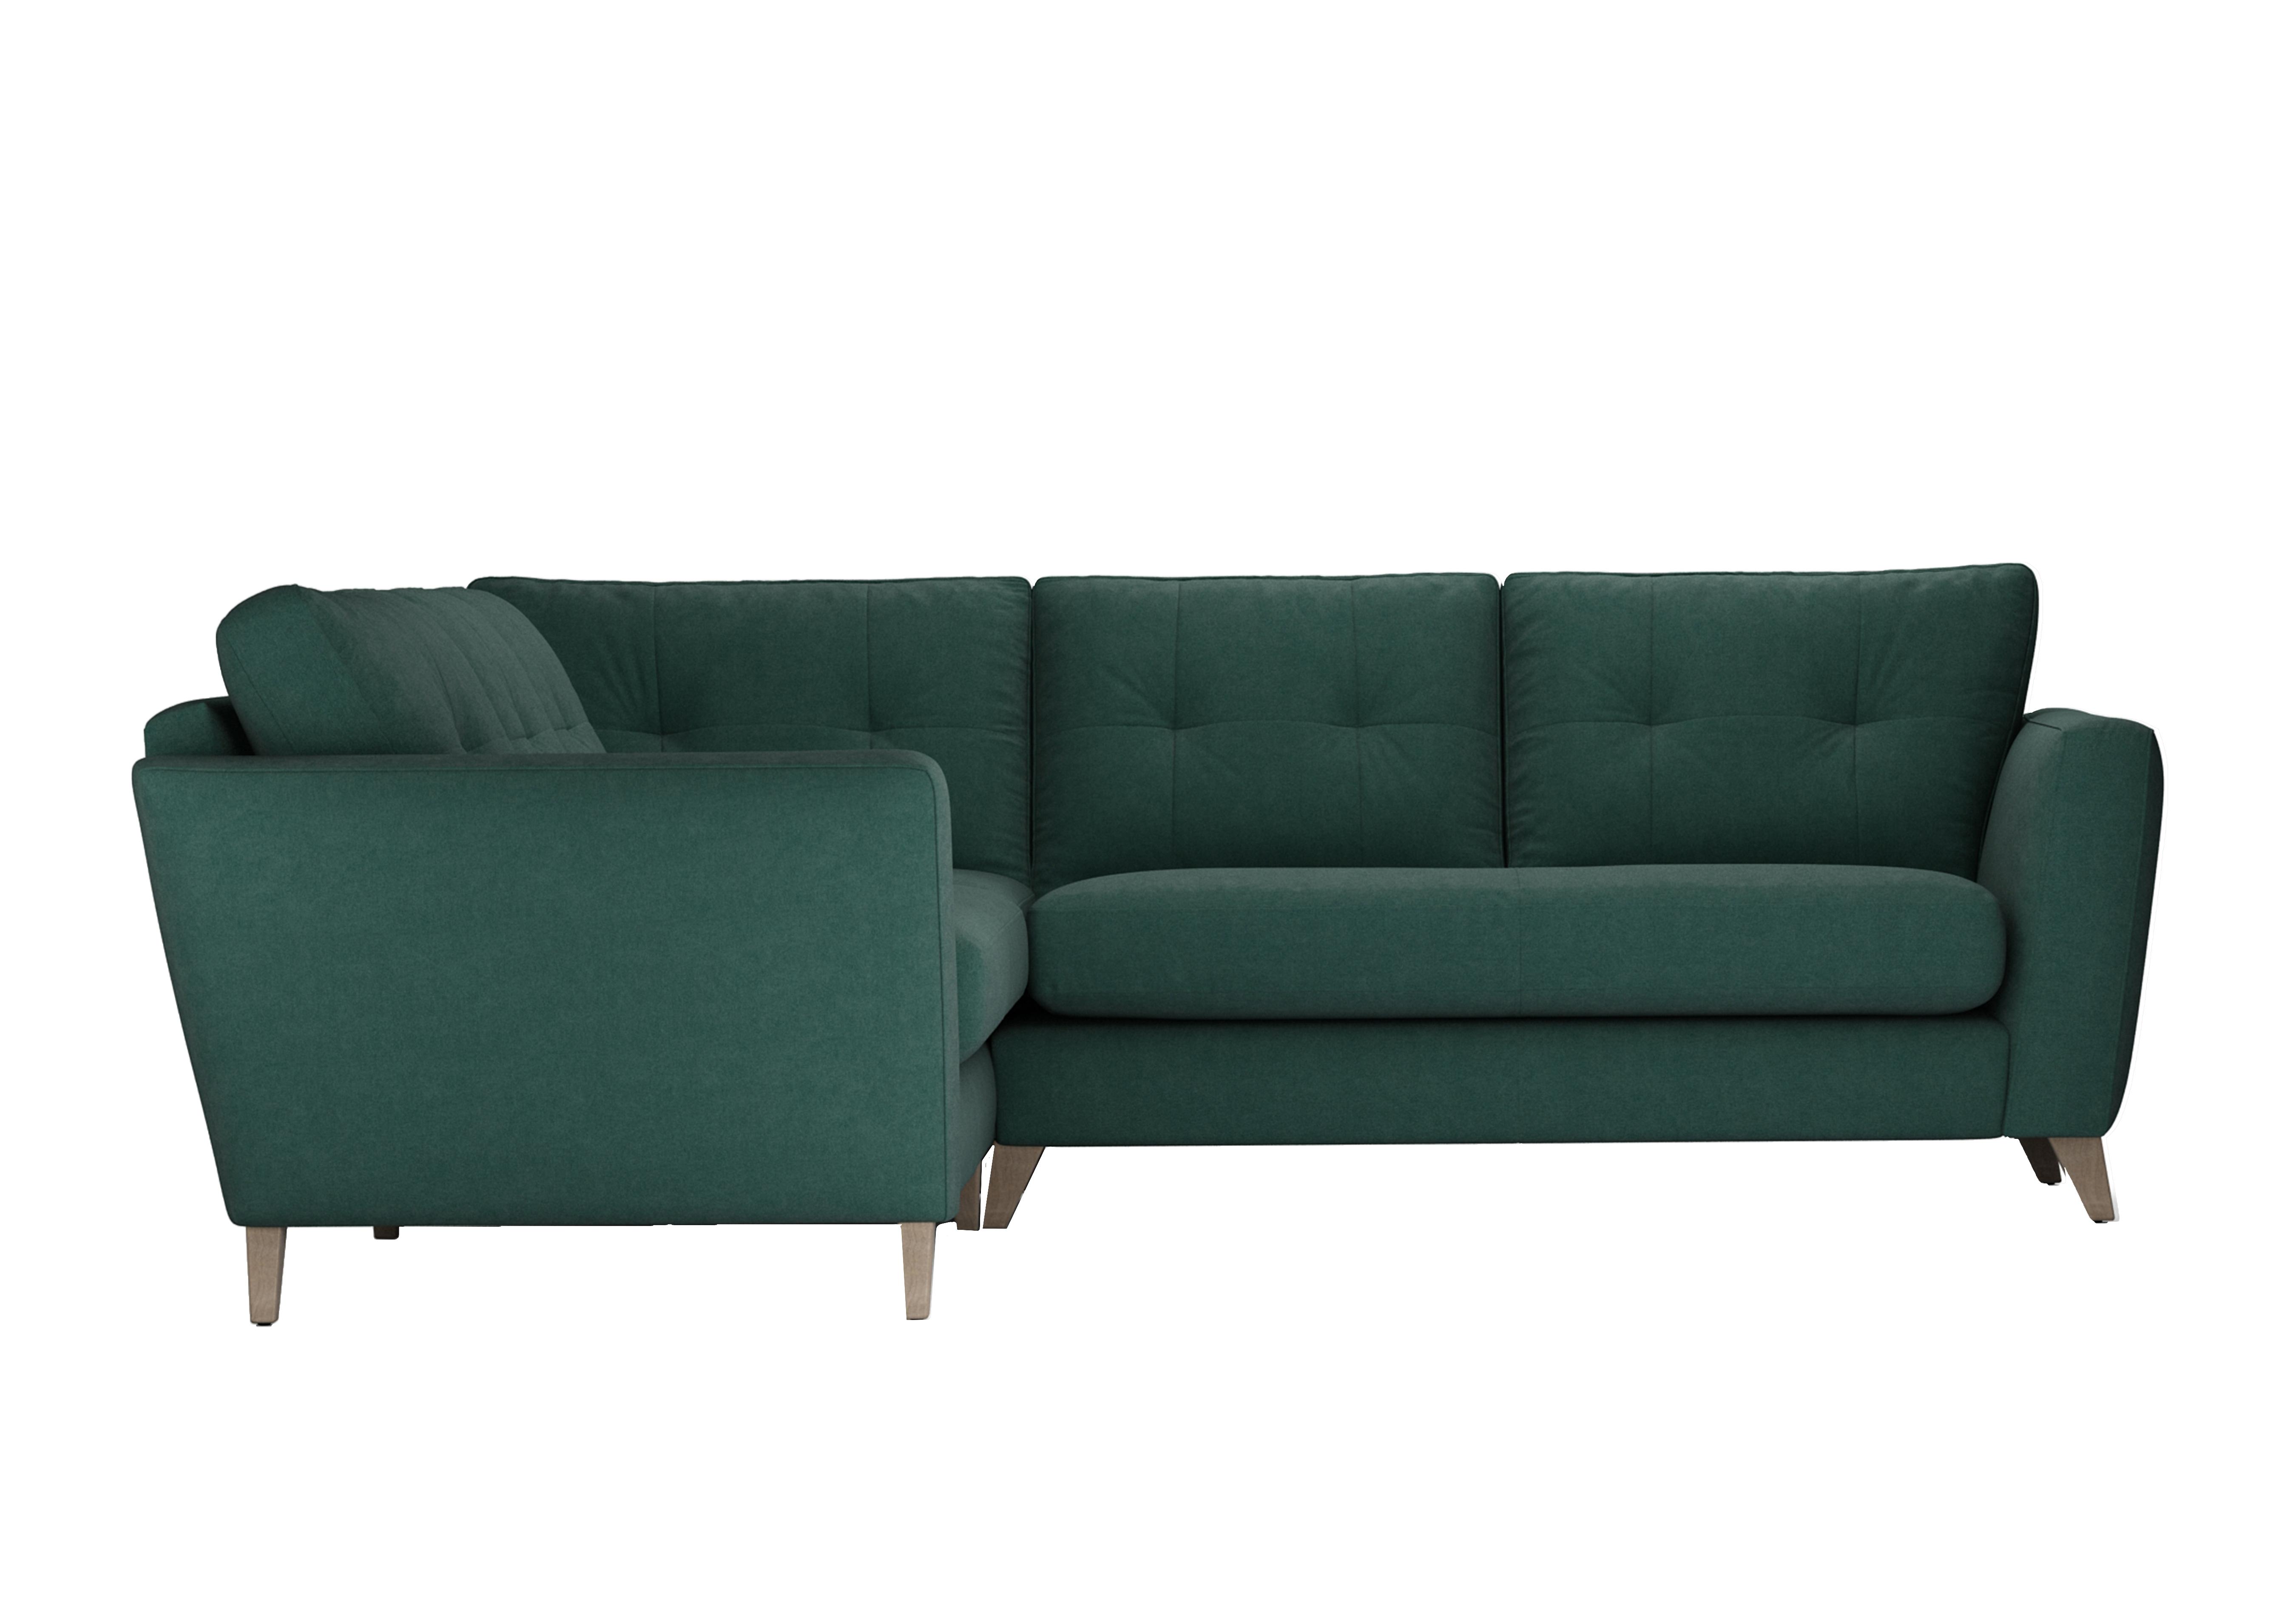 Hermione Fabric Corner Sofa in Cur226 Curly Kale Wo Ft on Furniture Village